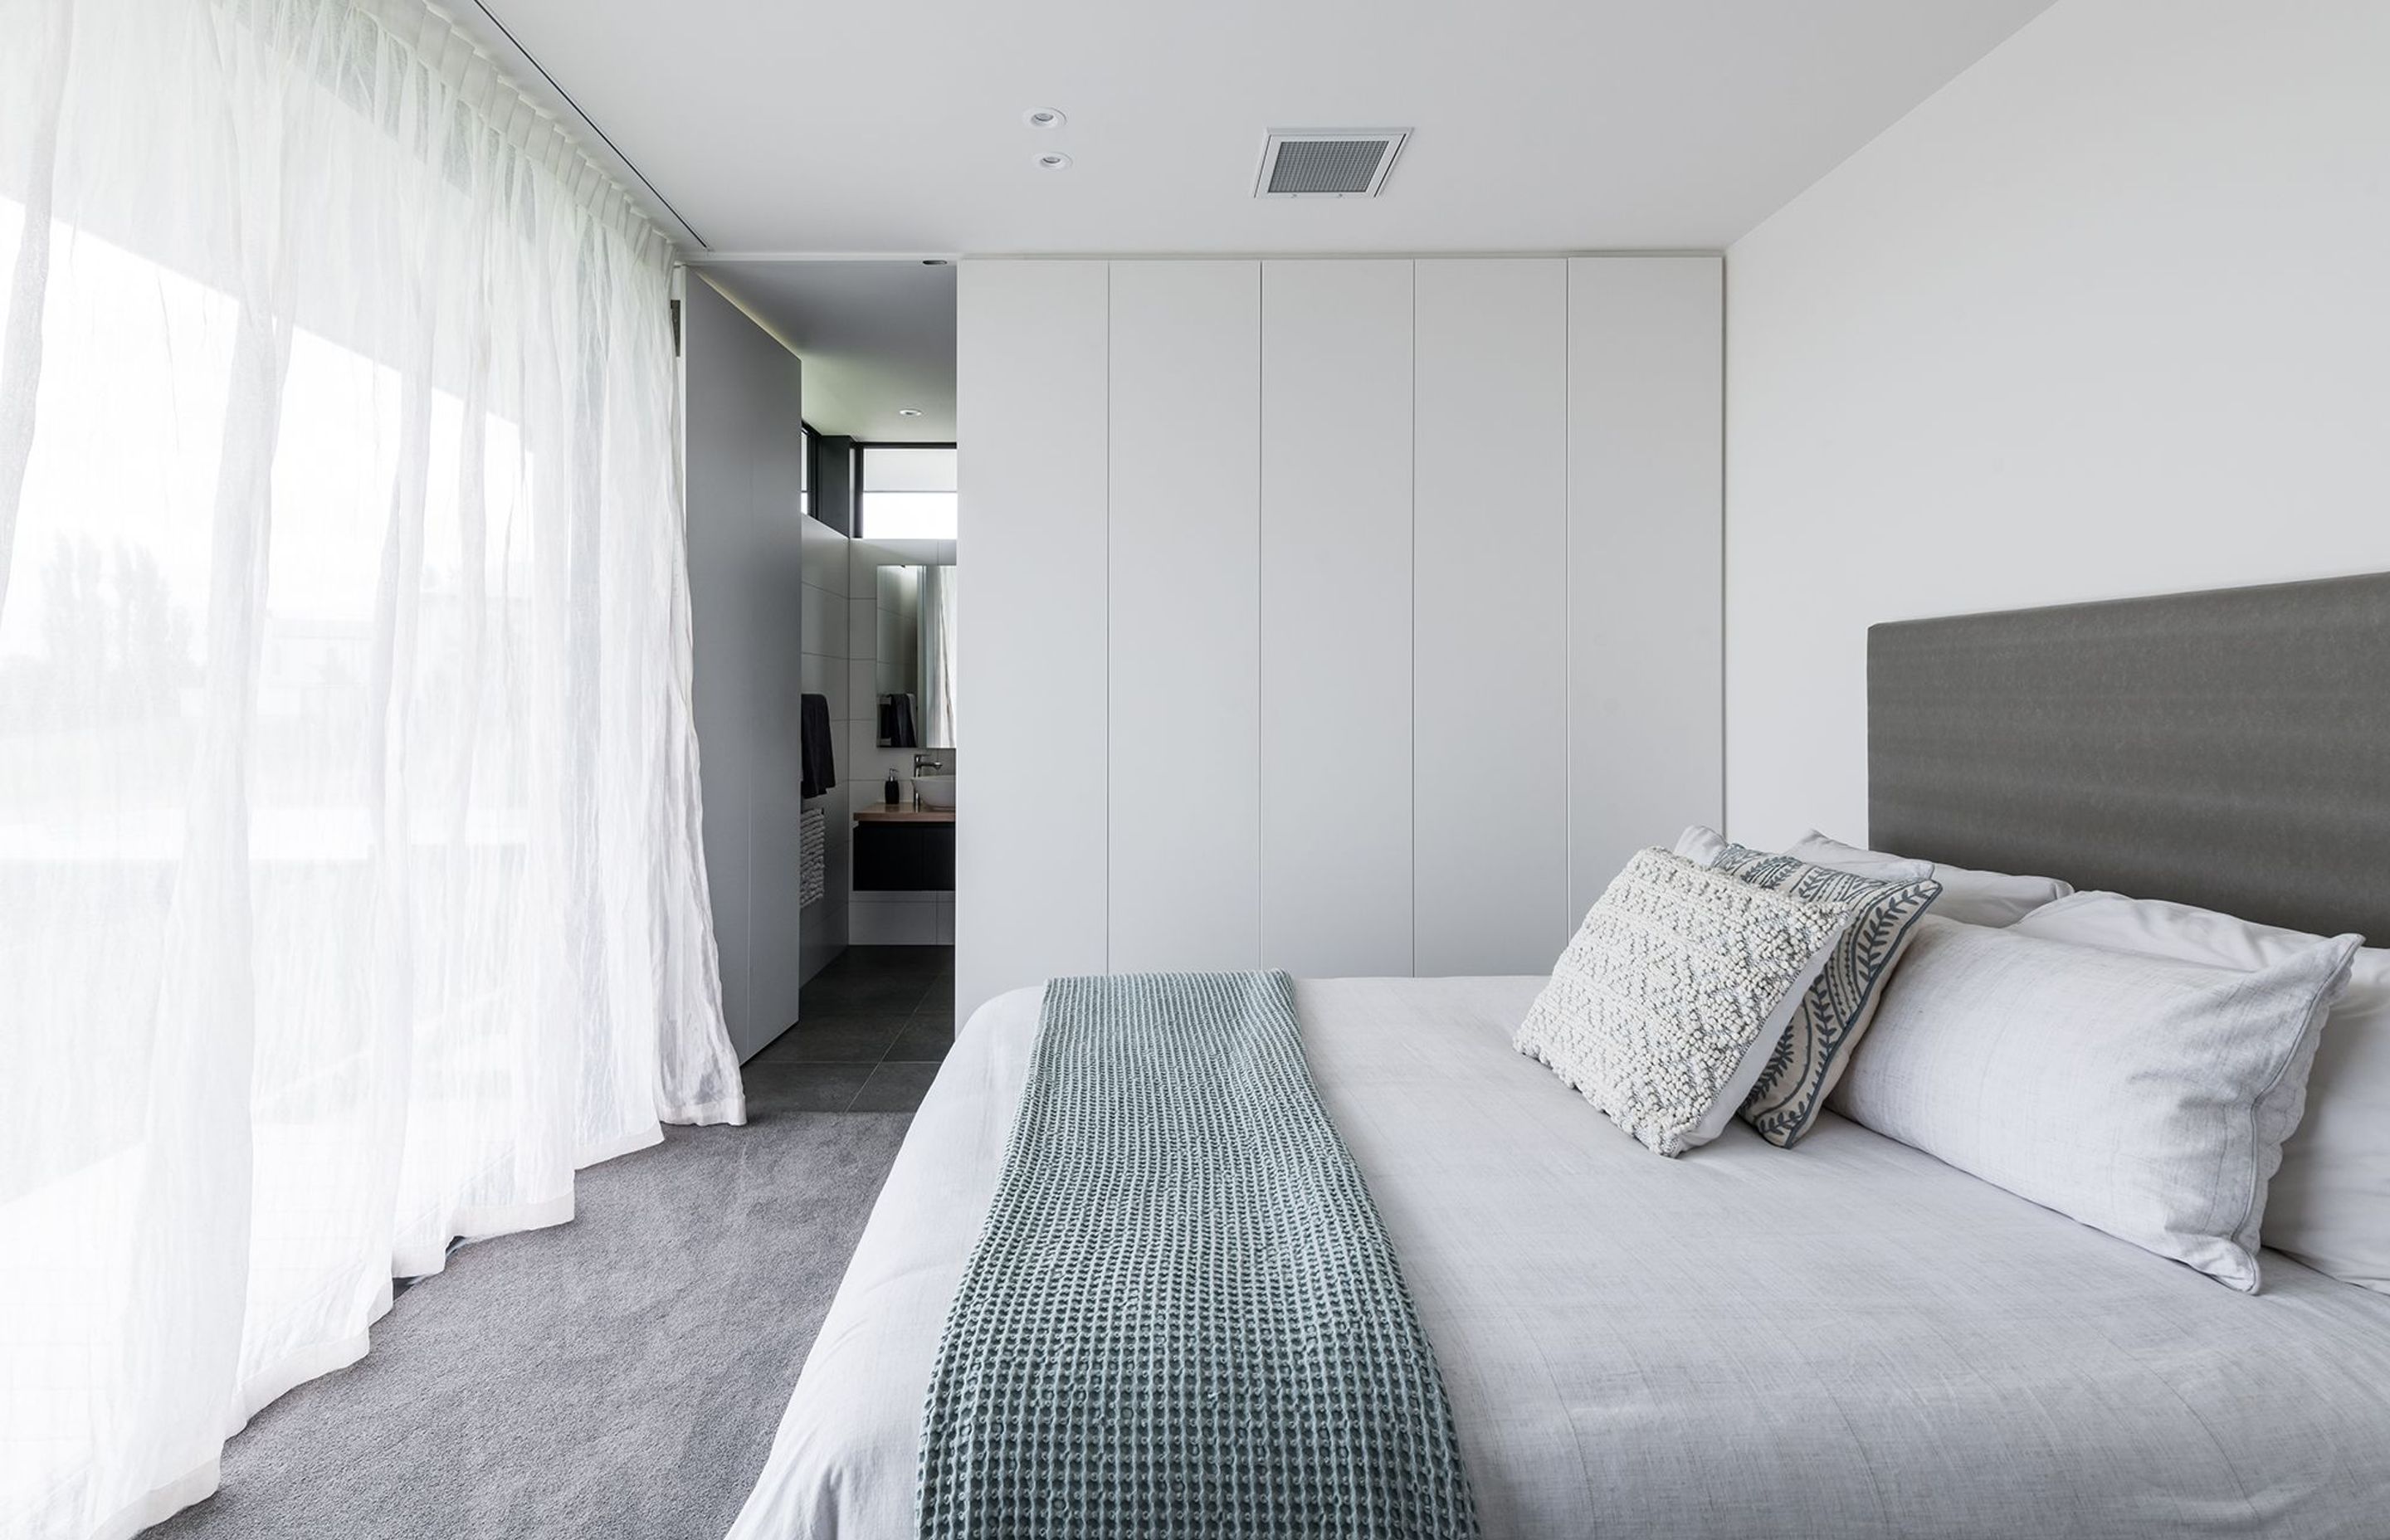 The bedroom is crisp and ethereal in white with soft tones of green and grey.